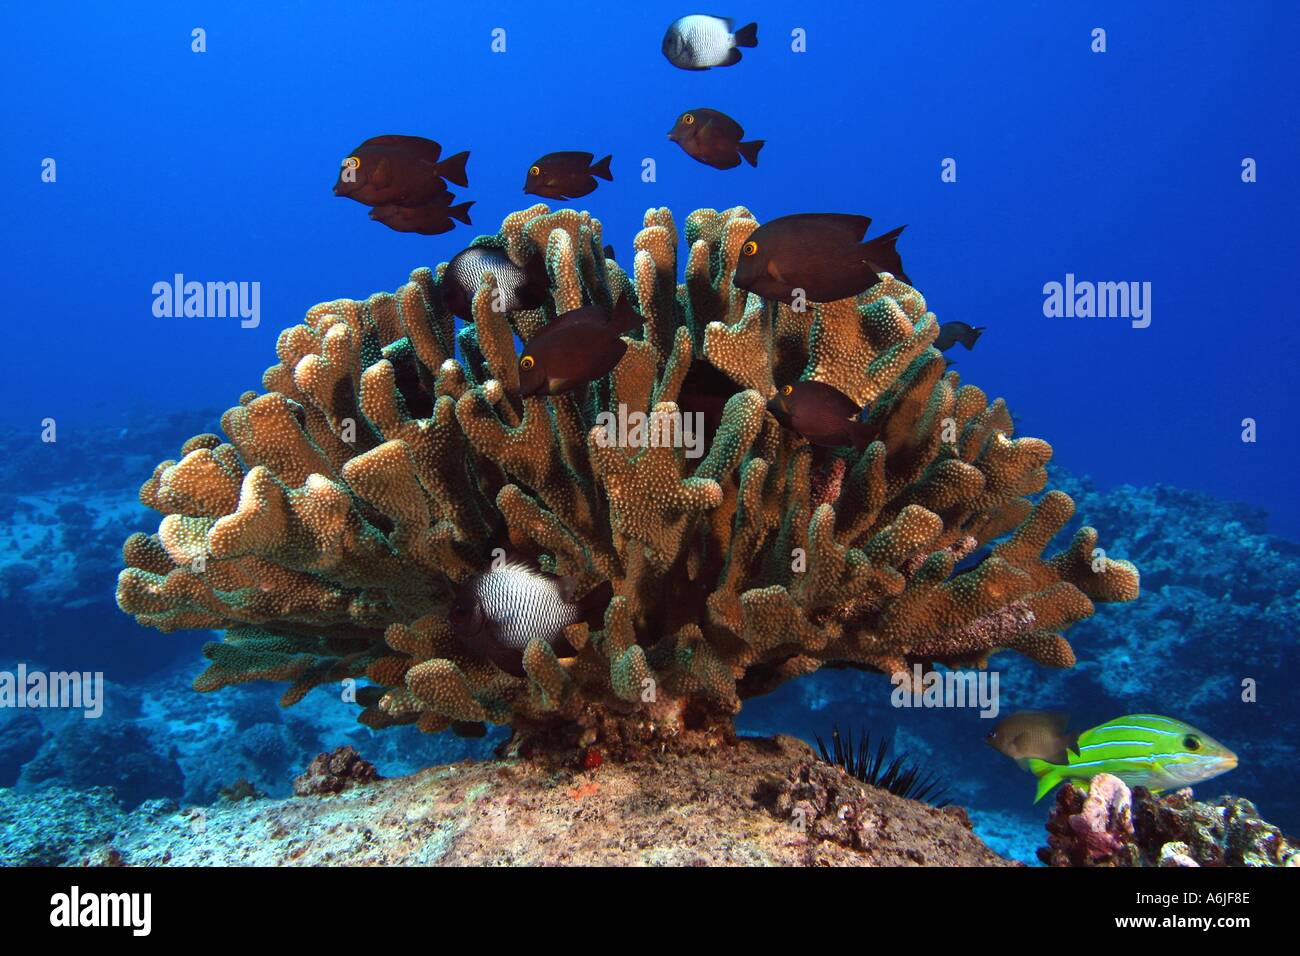 REEF SCENE WITH ANTLER CORAL.  HAWAII. Stock Photo